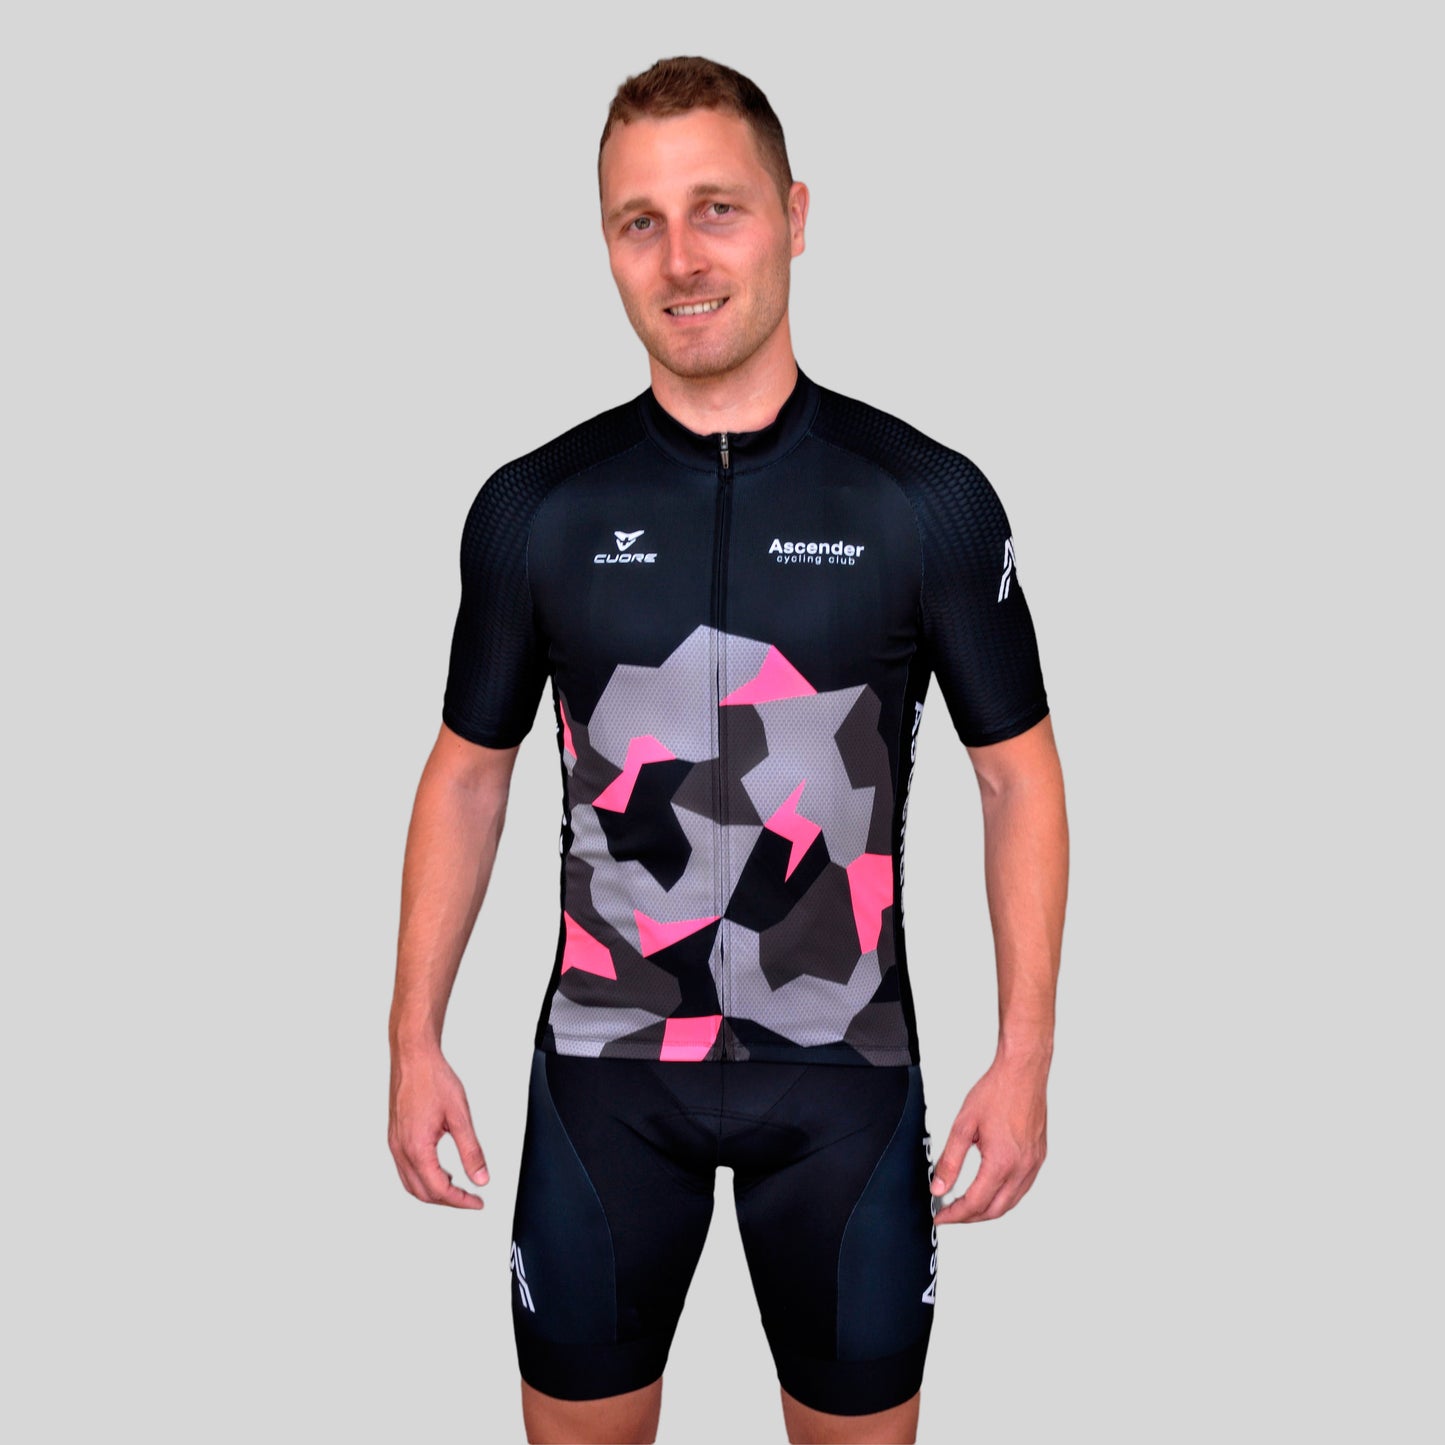 Lightning Bolt Camo Neon Pink Short Sleeves Jersey from Ascender Cycling Club Front Zoom Global View